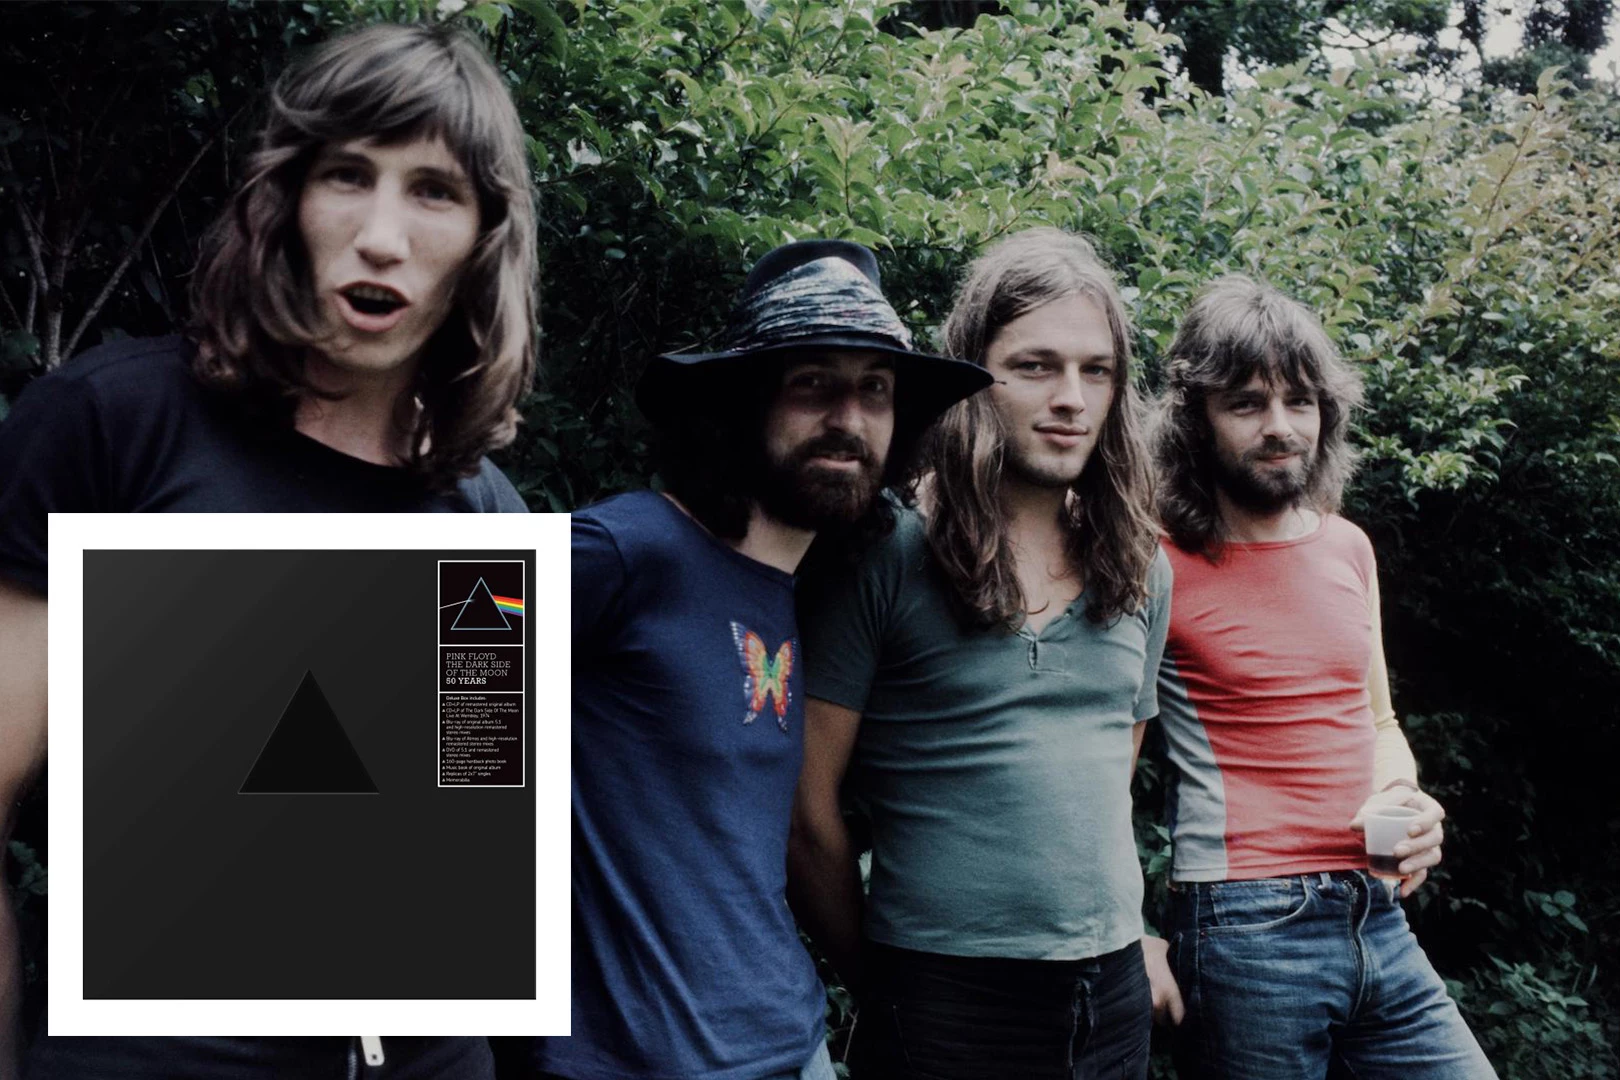 The Dark Side of the Moon at 50: an album artwork expert on Pink